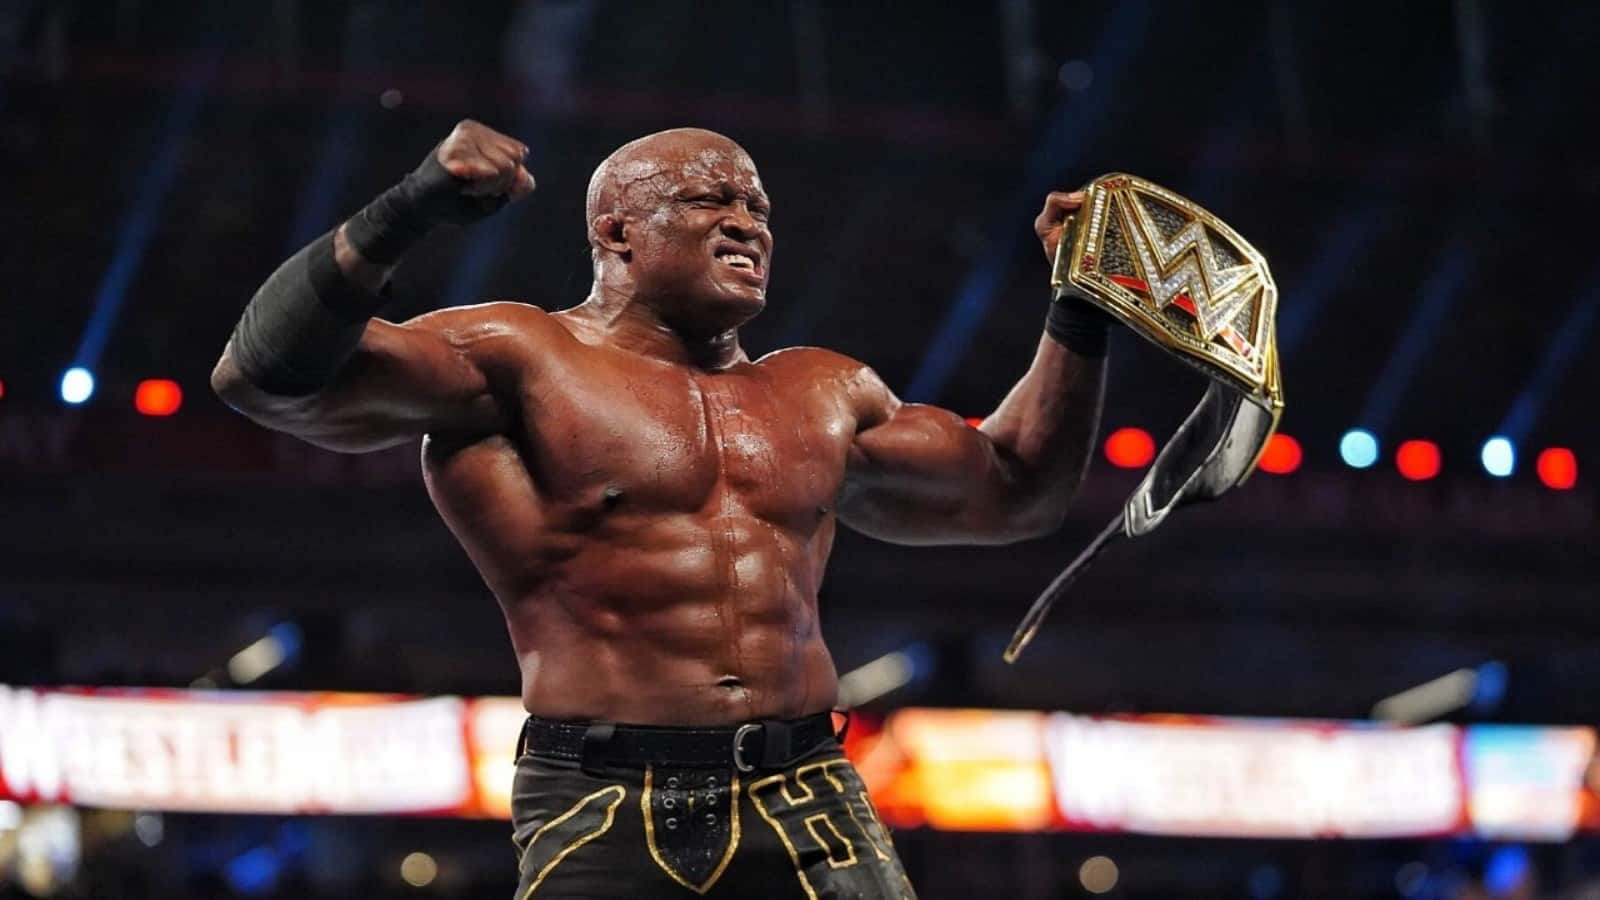 Bobby Lashley With Closed Fist And Belt On One Hand Wallpaper